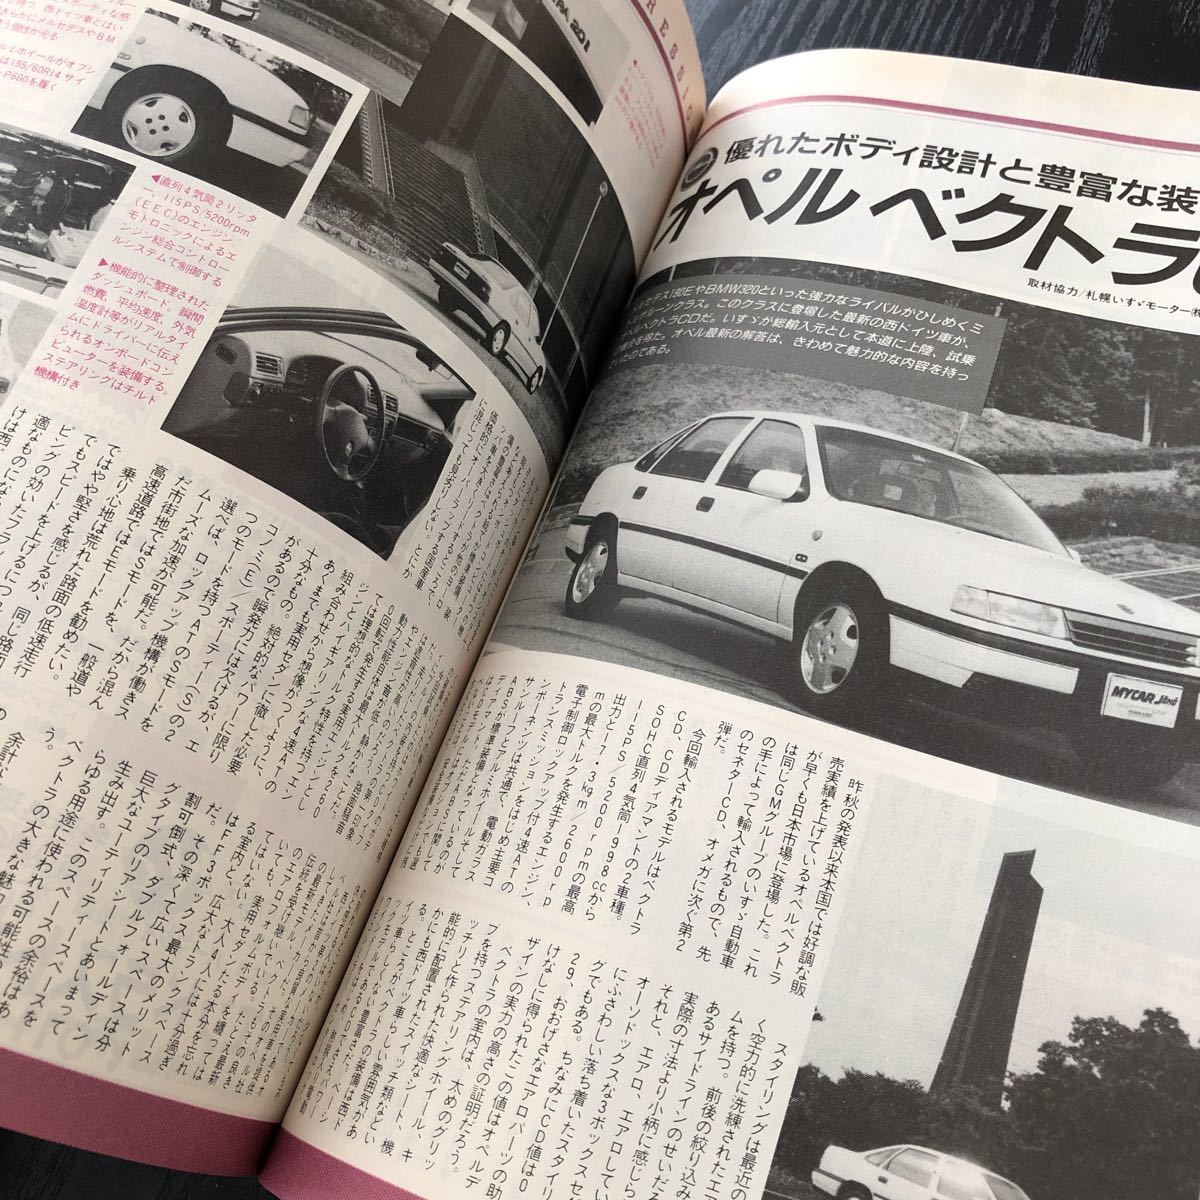 su51 mica - information 1989 year 9 month number monthly mica - information Hokkaido. happy car magazine car automobile old car that time thing MYCAR store foreign automobile domestic production used car 